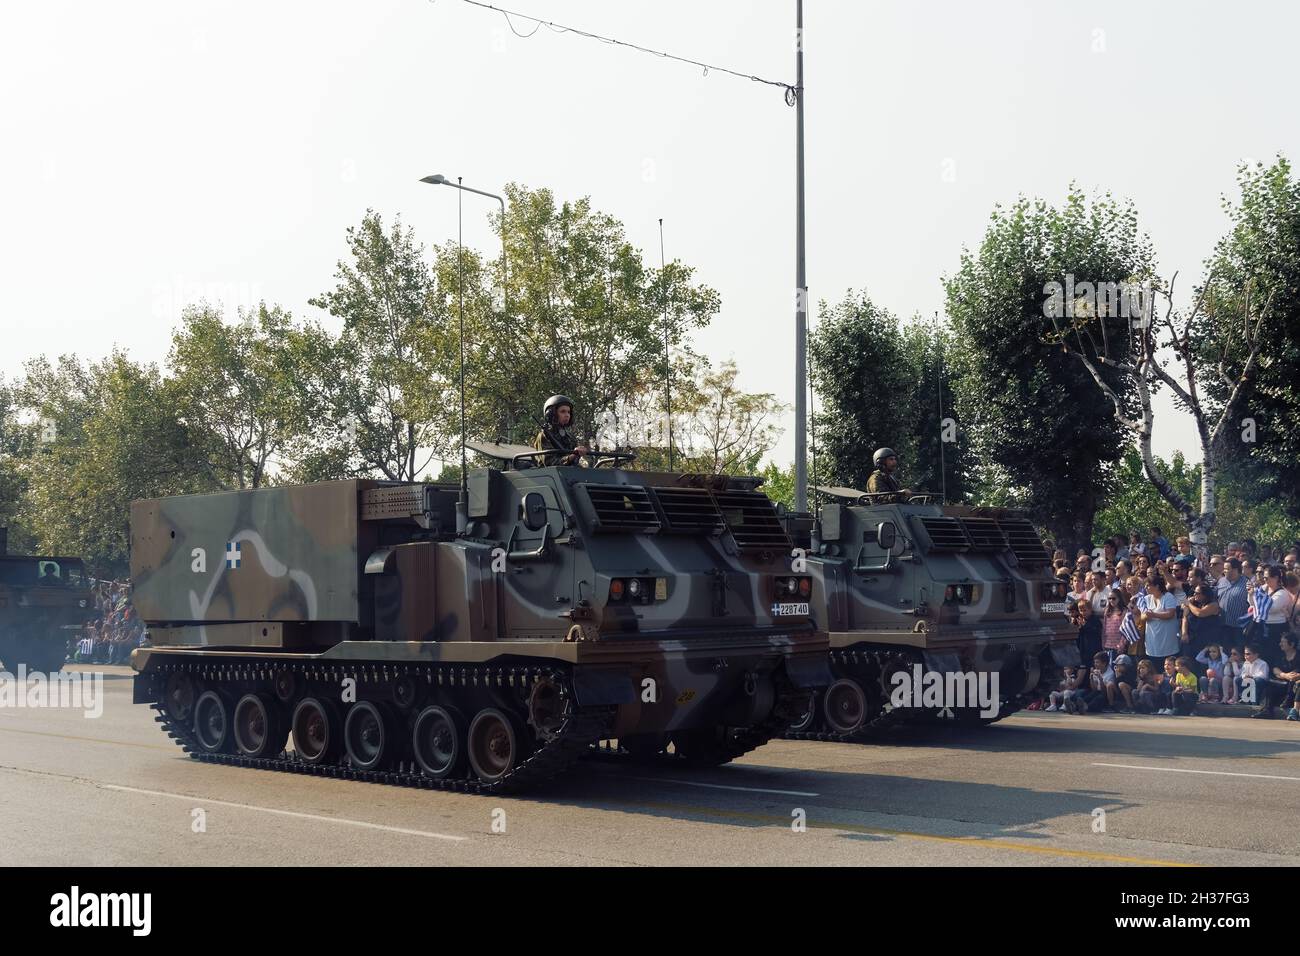 Thessaloniki, Greece - October 28 2019: Oxi Day Greek Army tanks parade. Hellenic military march during national day celebration, with crowd cheering holding flags. Stock Photo